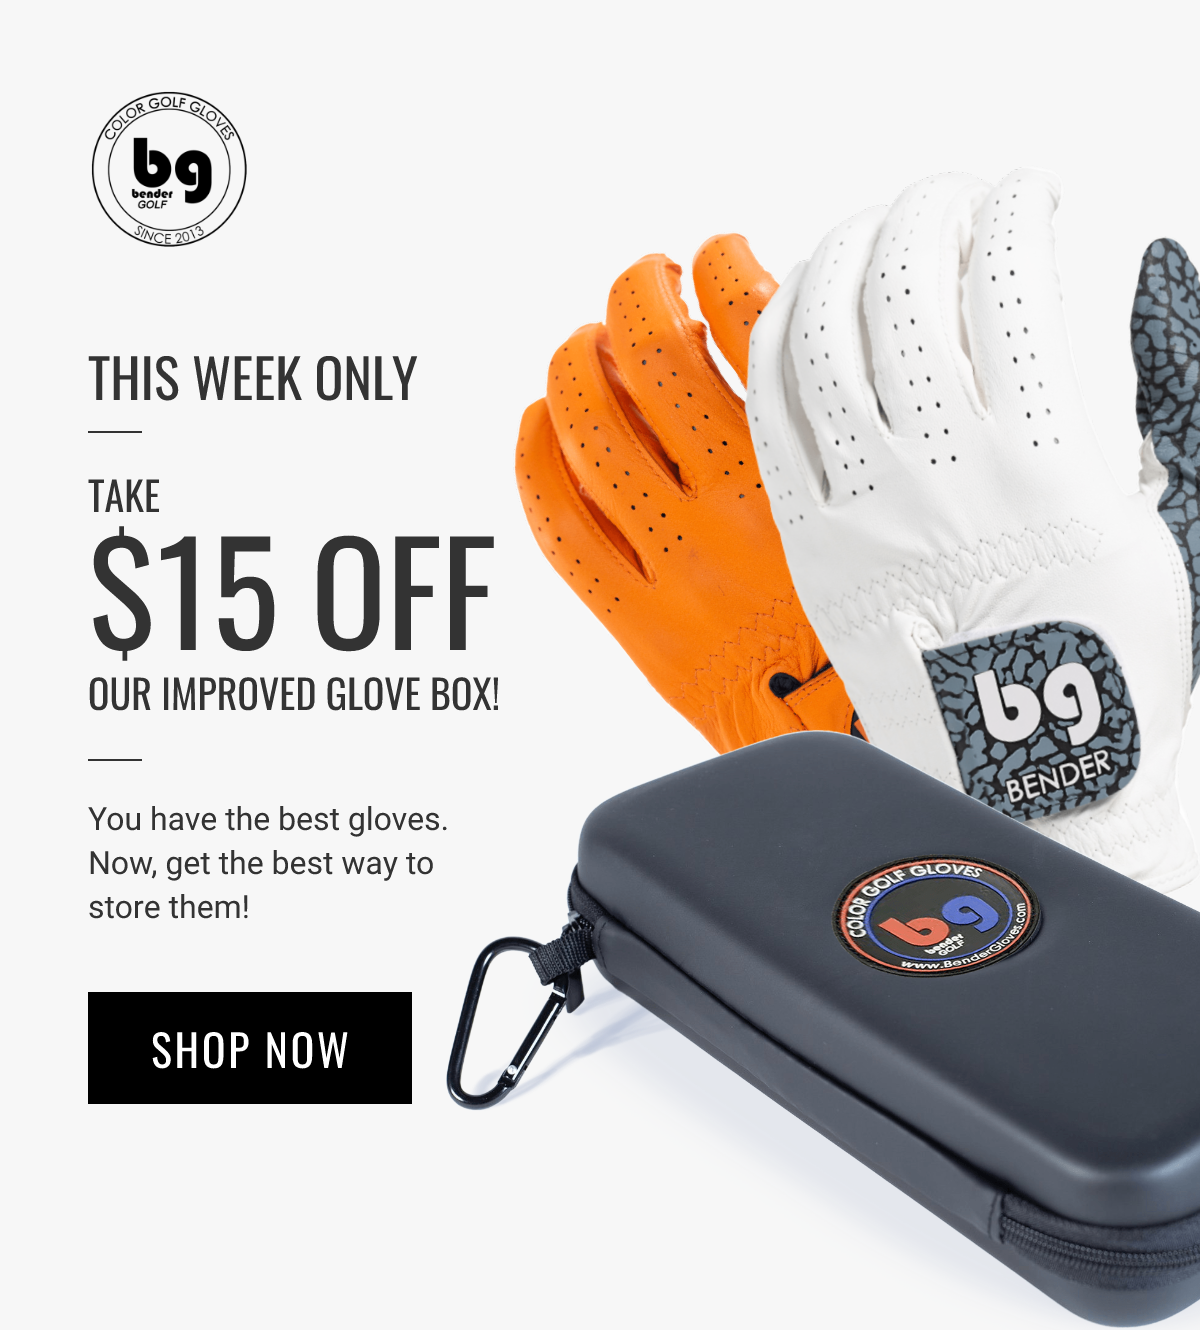 THIS WEEK ONLY 9 ie . TAKE . a: As S15 OFF OUR IMPROVED GLOVE BOX! You have the best gloves. Now, get the best way to store them! SHOP NOW 